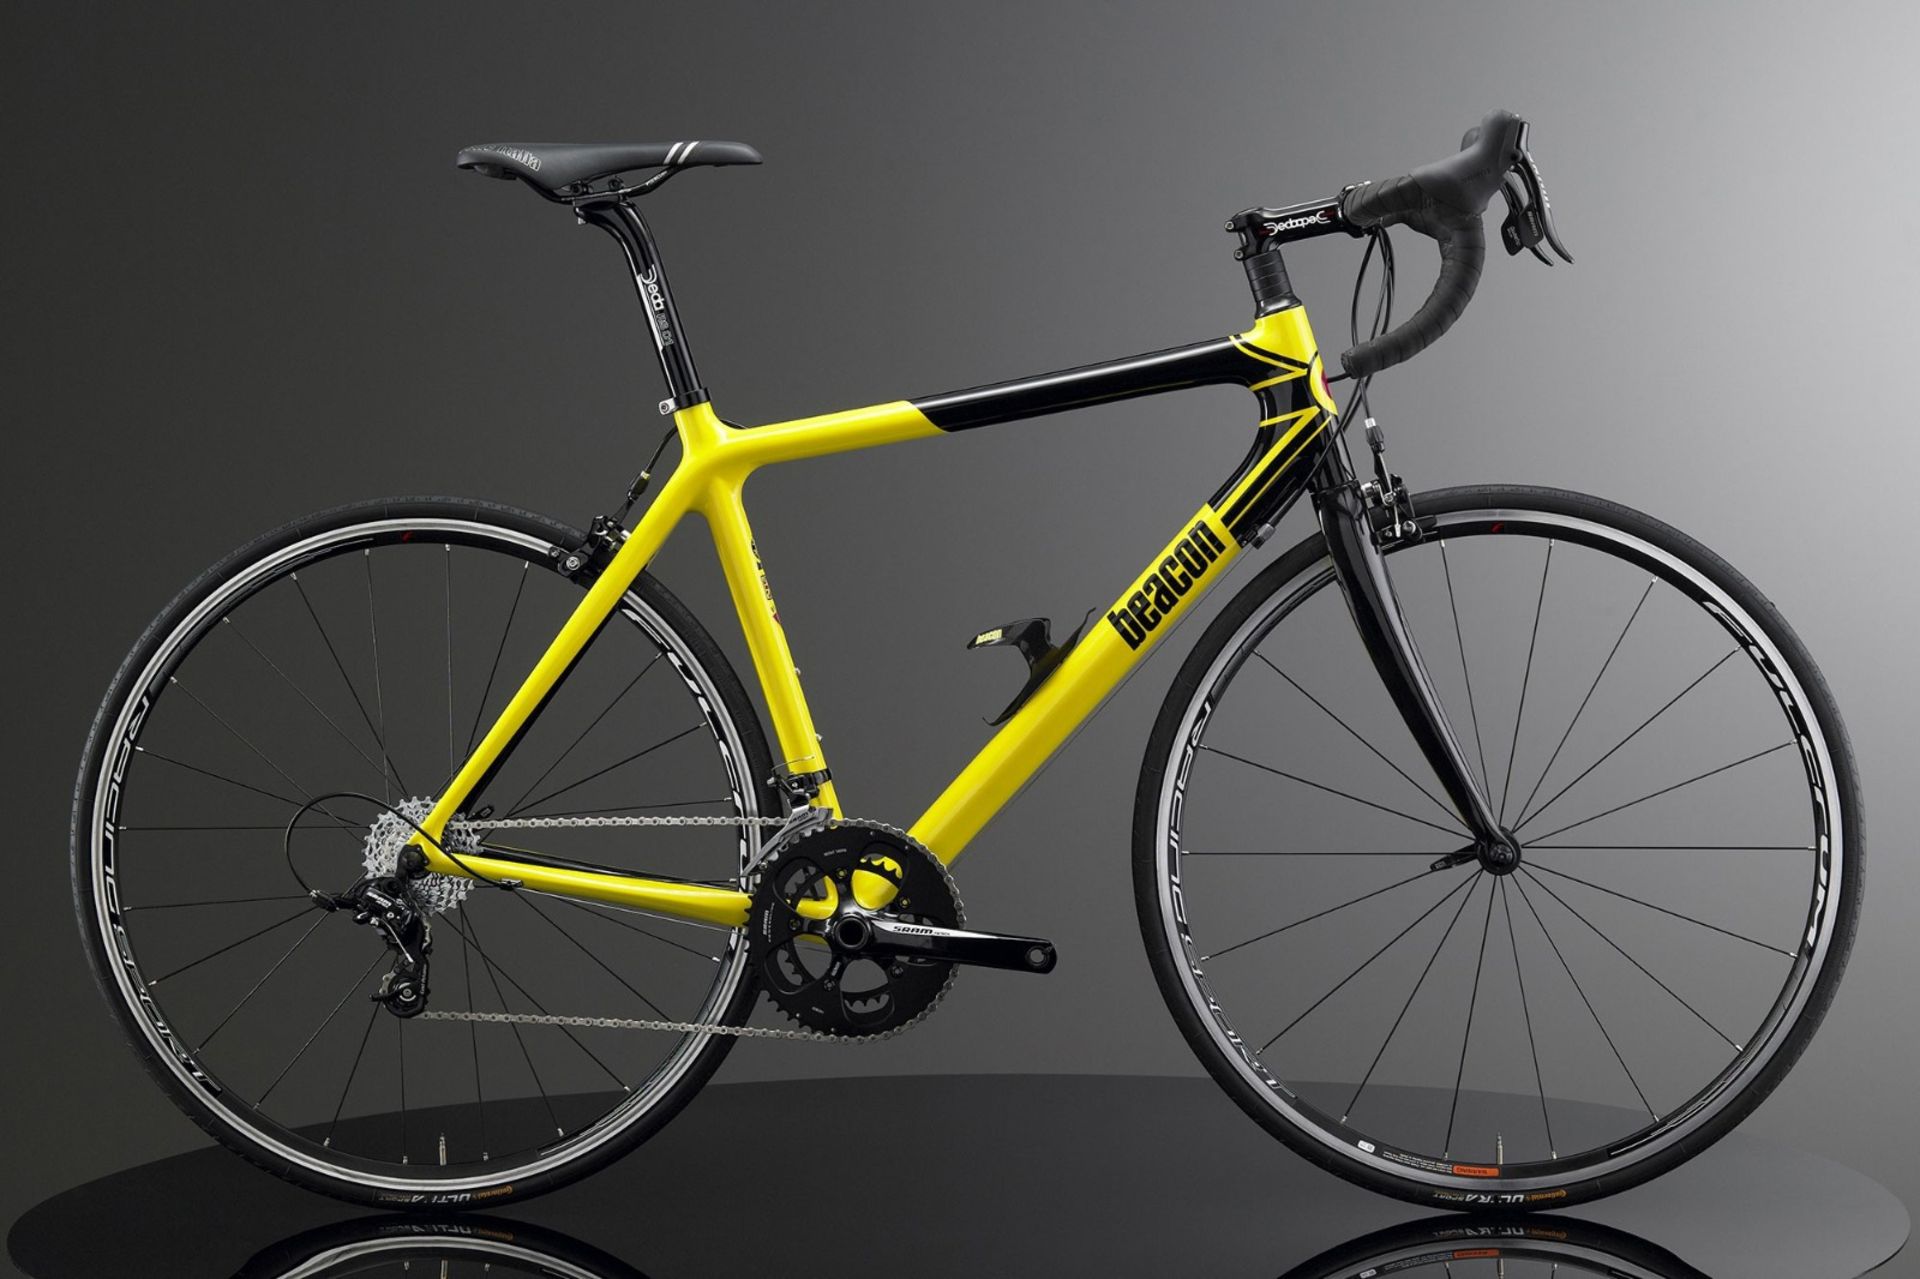 1 x Beacon Model BF-60, Size 440, Carbon Fibre Bike Frame in Yellow & Black. - Image 2 of 3